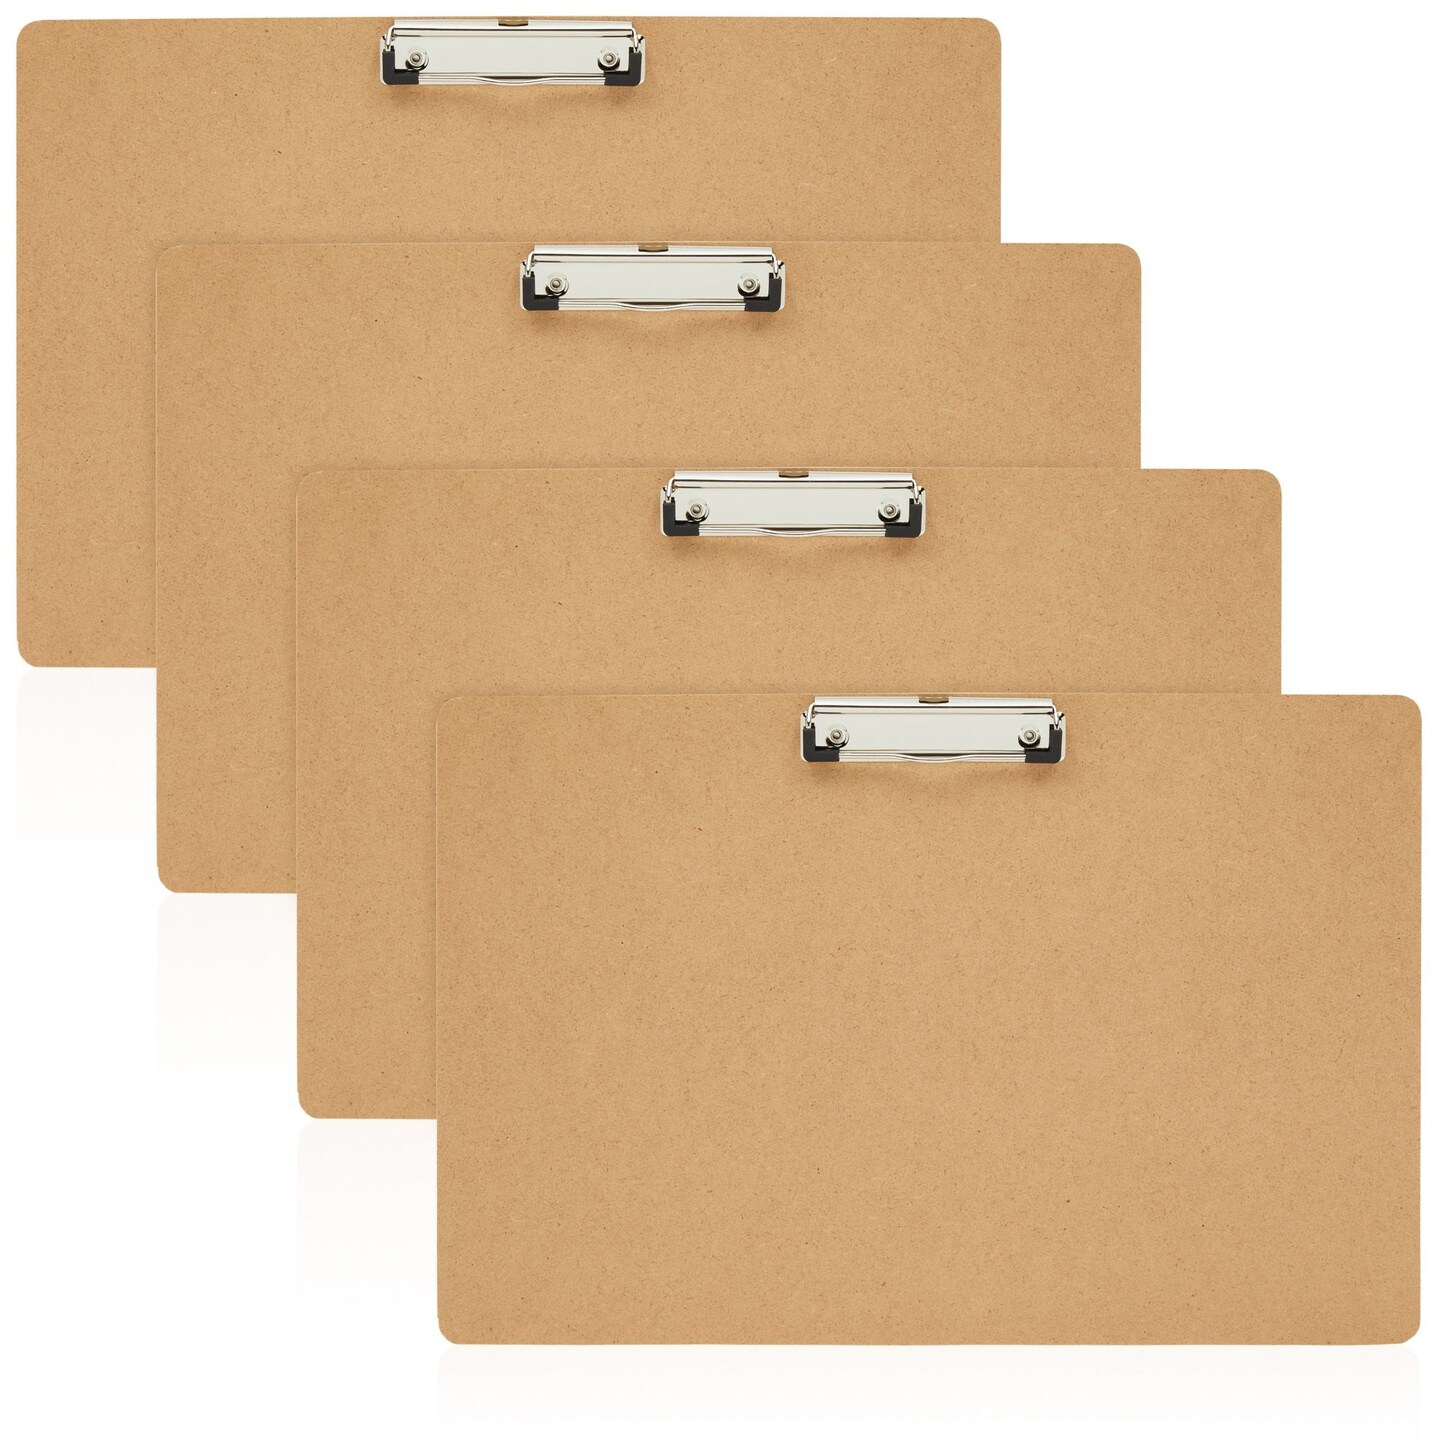 4 Pack Extra Large 11x17 Clipboards, Horizontal Wooden Lap Boards with Low  Profile Clip for Drawing, Sketching, Art Supplies (3mm Thick)